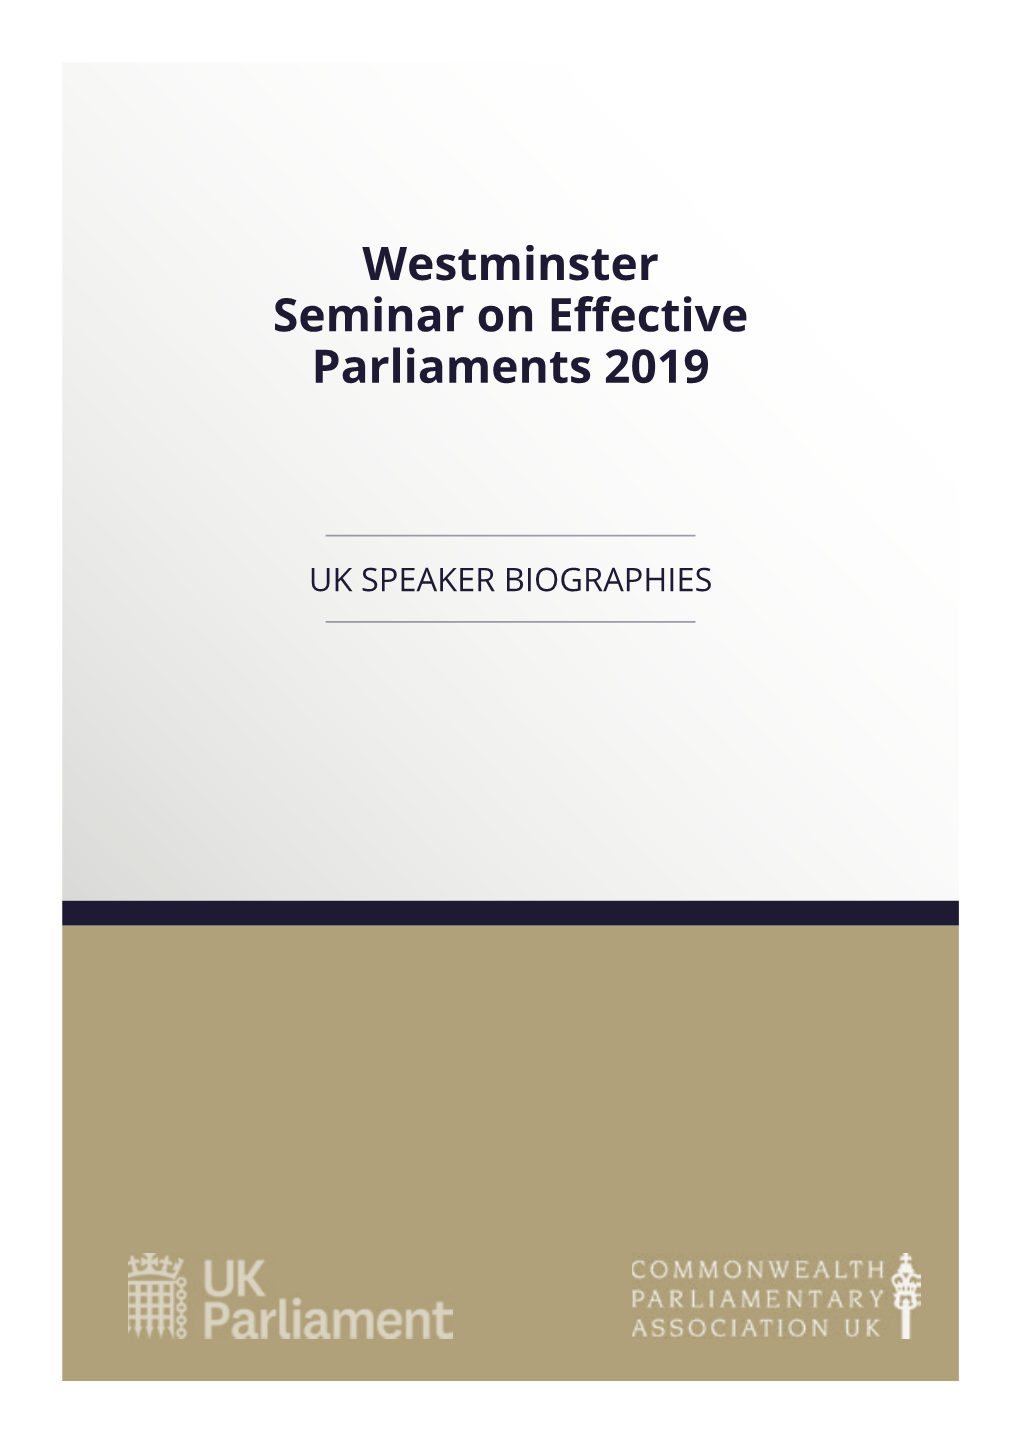 Westminster Seminar on Effective Parliaments 2019